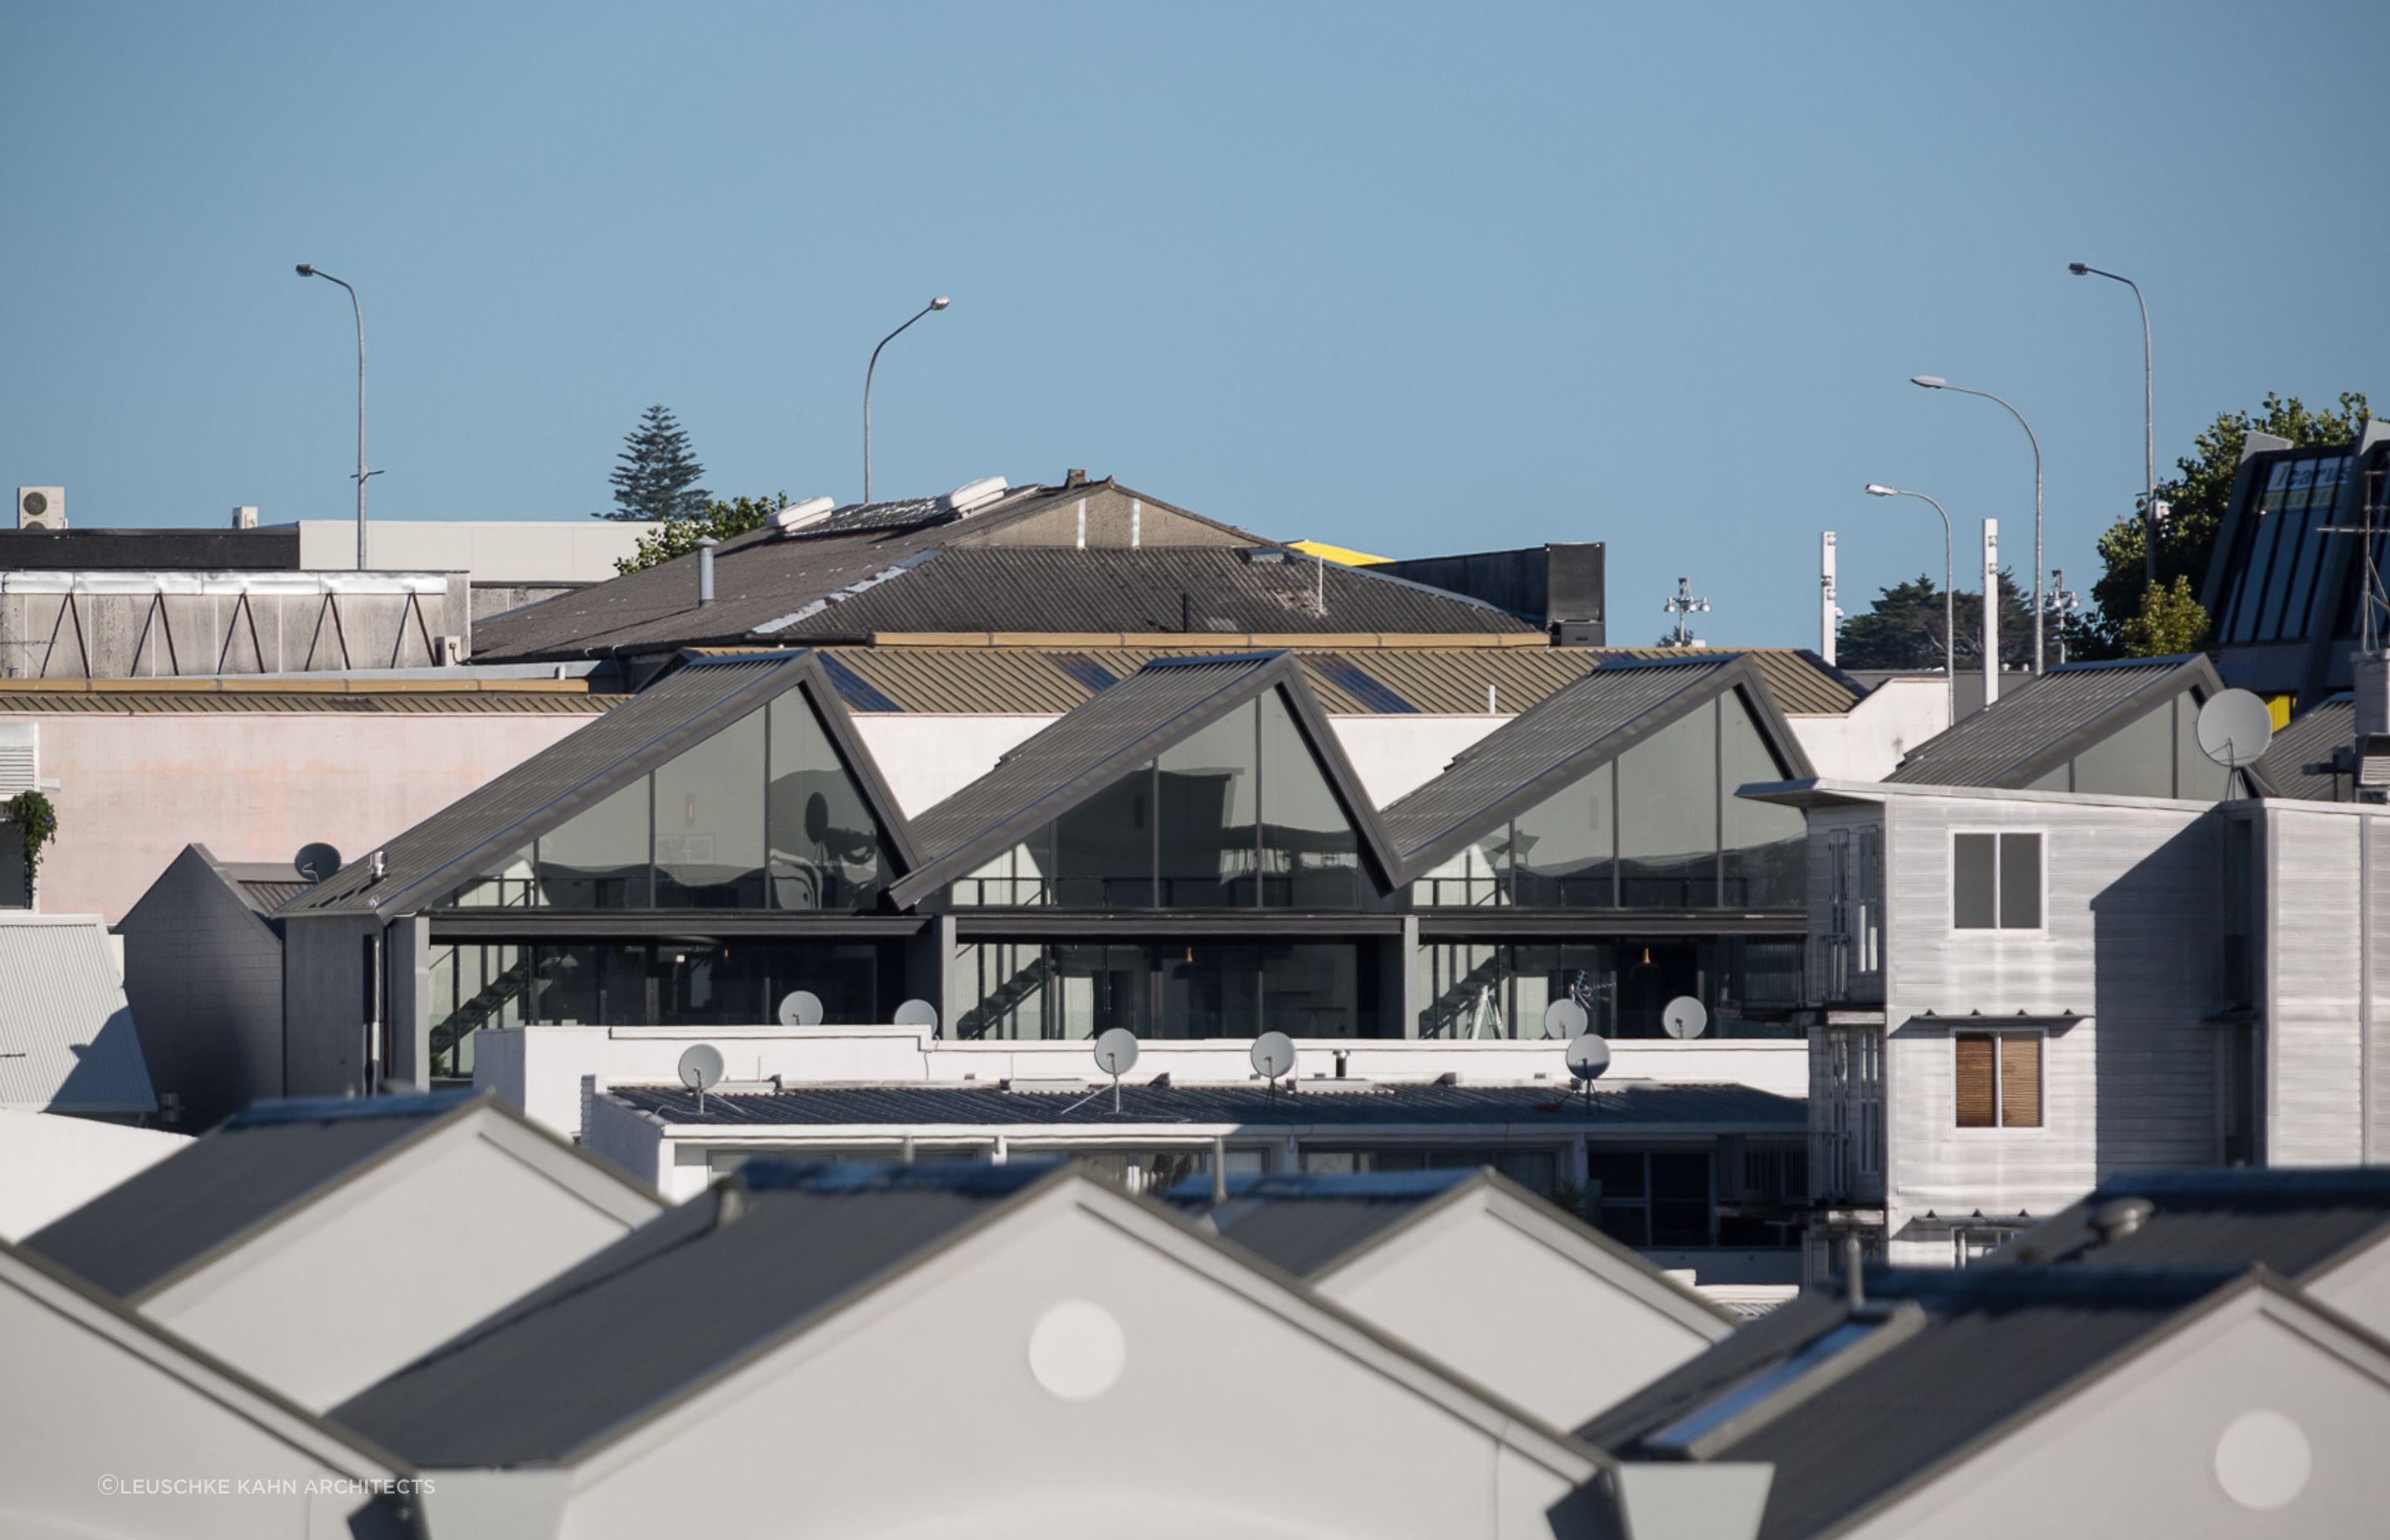 The tips of five terraced houses offer views for all over Grey Lynn in Auckland.